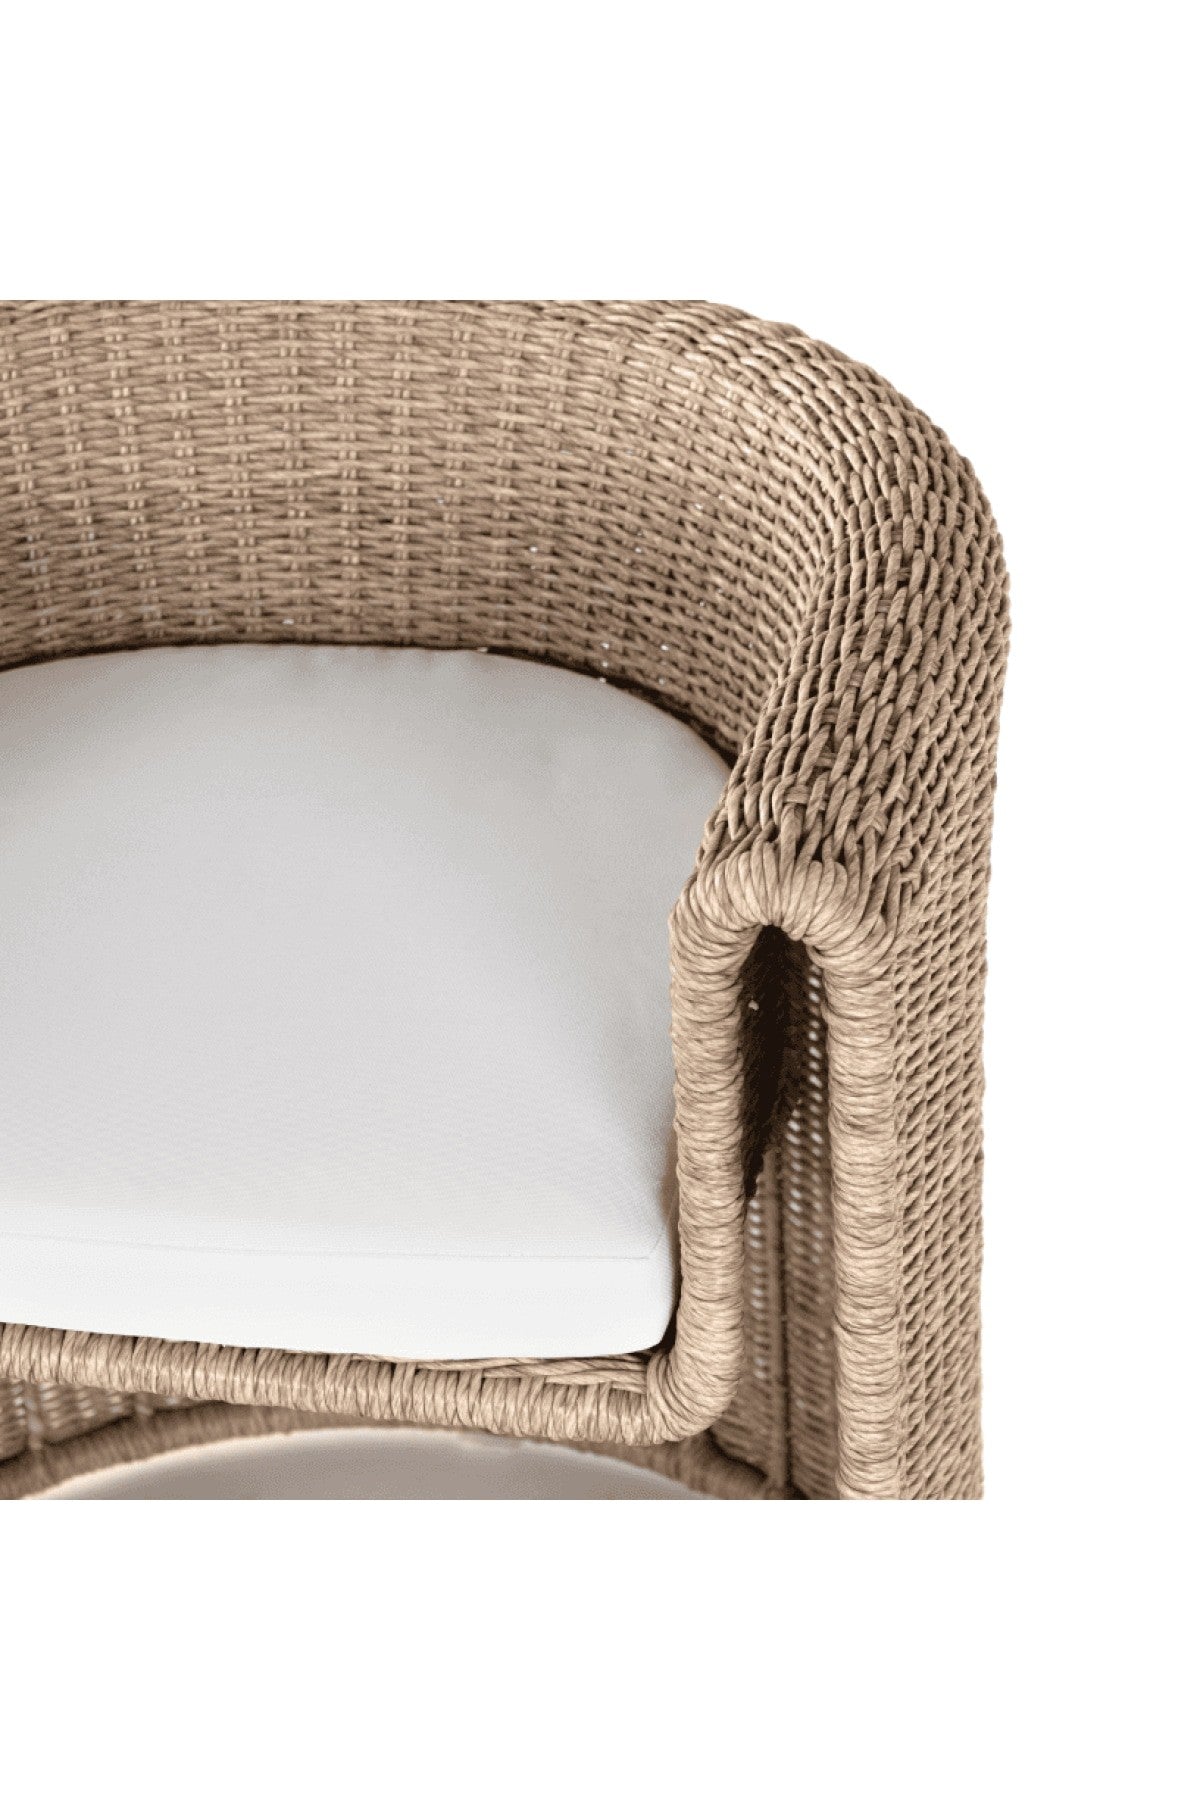 Caleb Outdoor Dining Chair - Vintage White